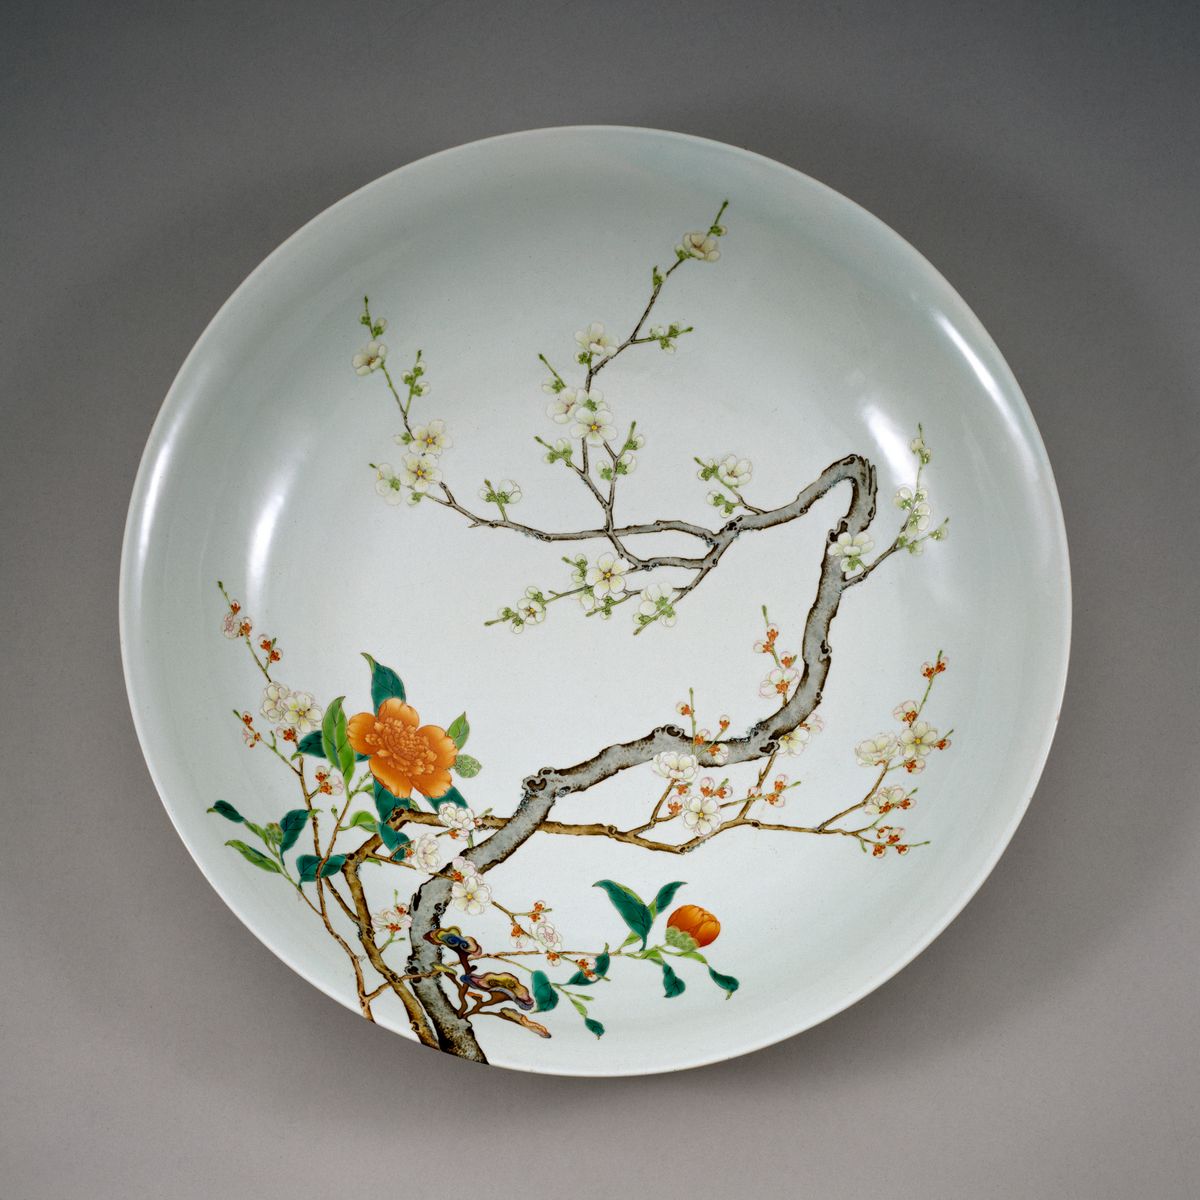 Chinese bowl auctions for millions in Hong Kong